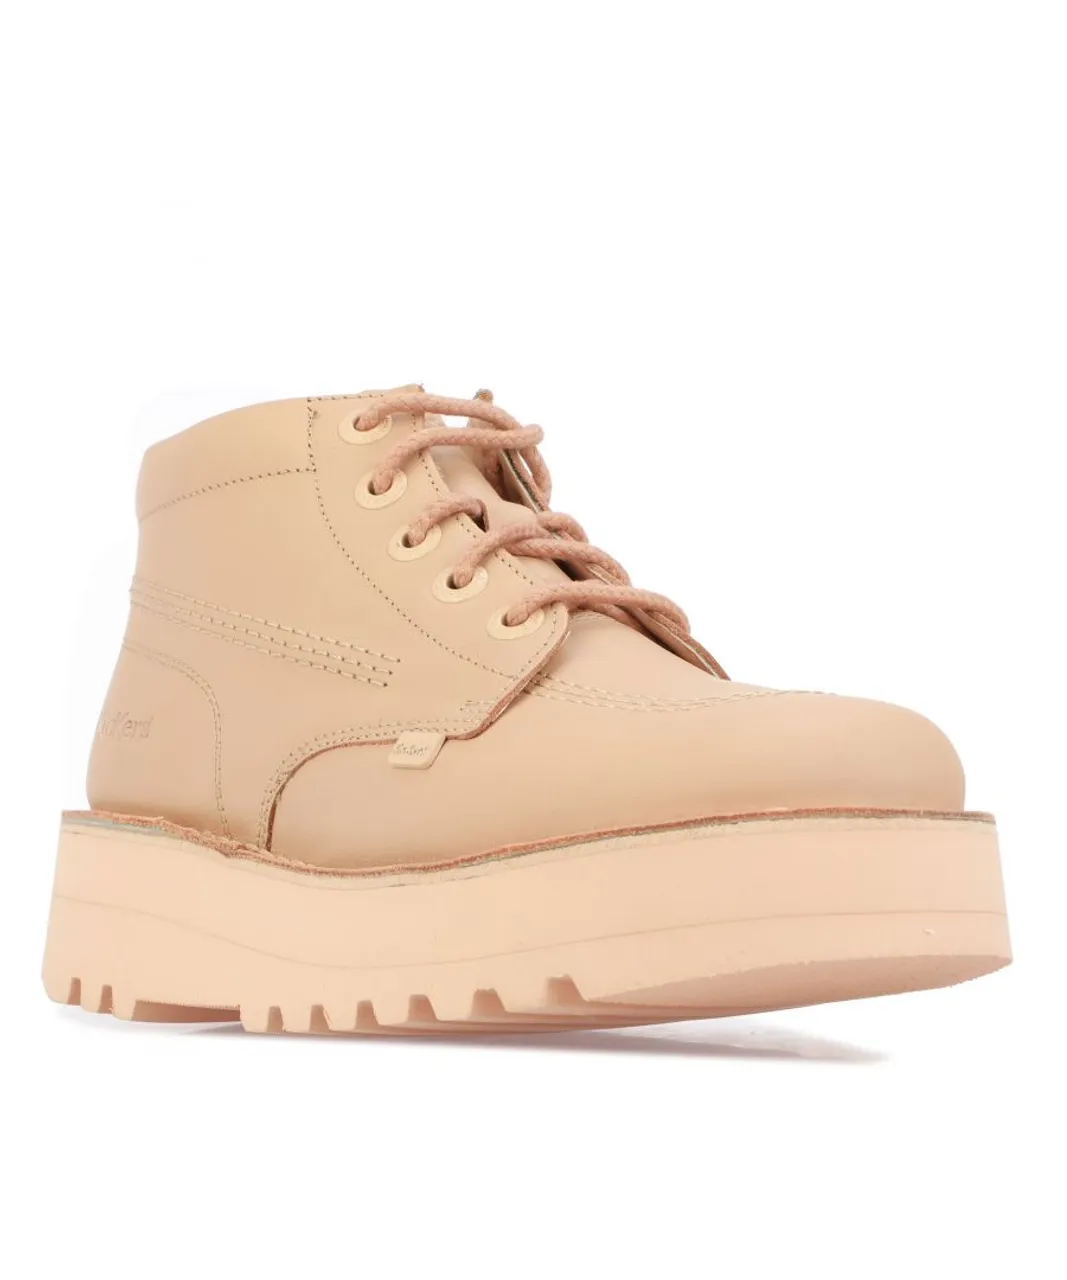 Kickers Womenss Kick Hi Stack Boots in Beige Leather